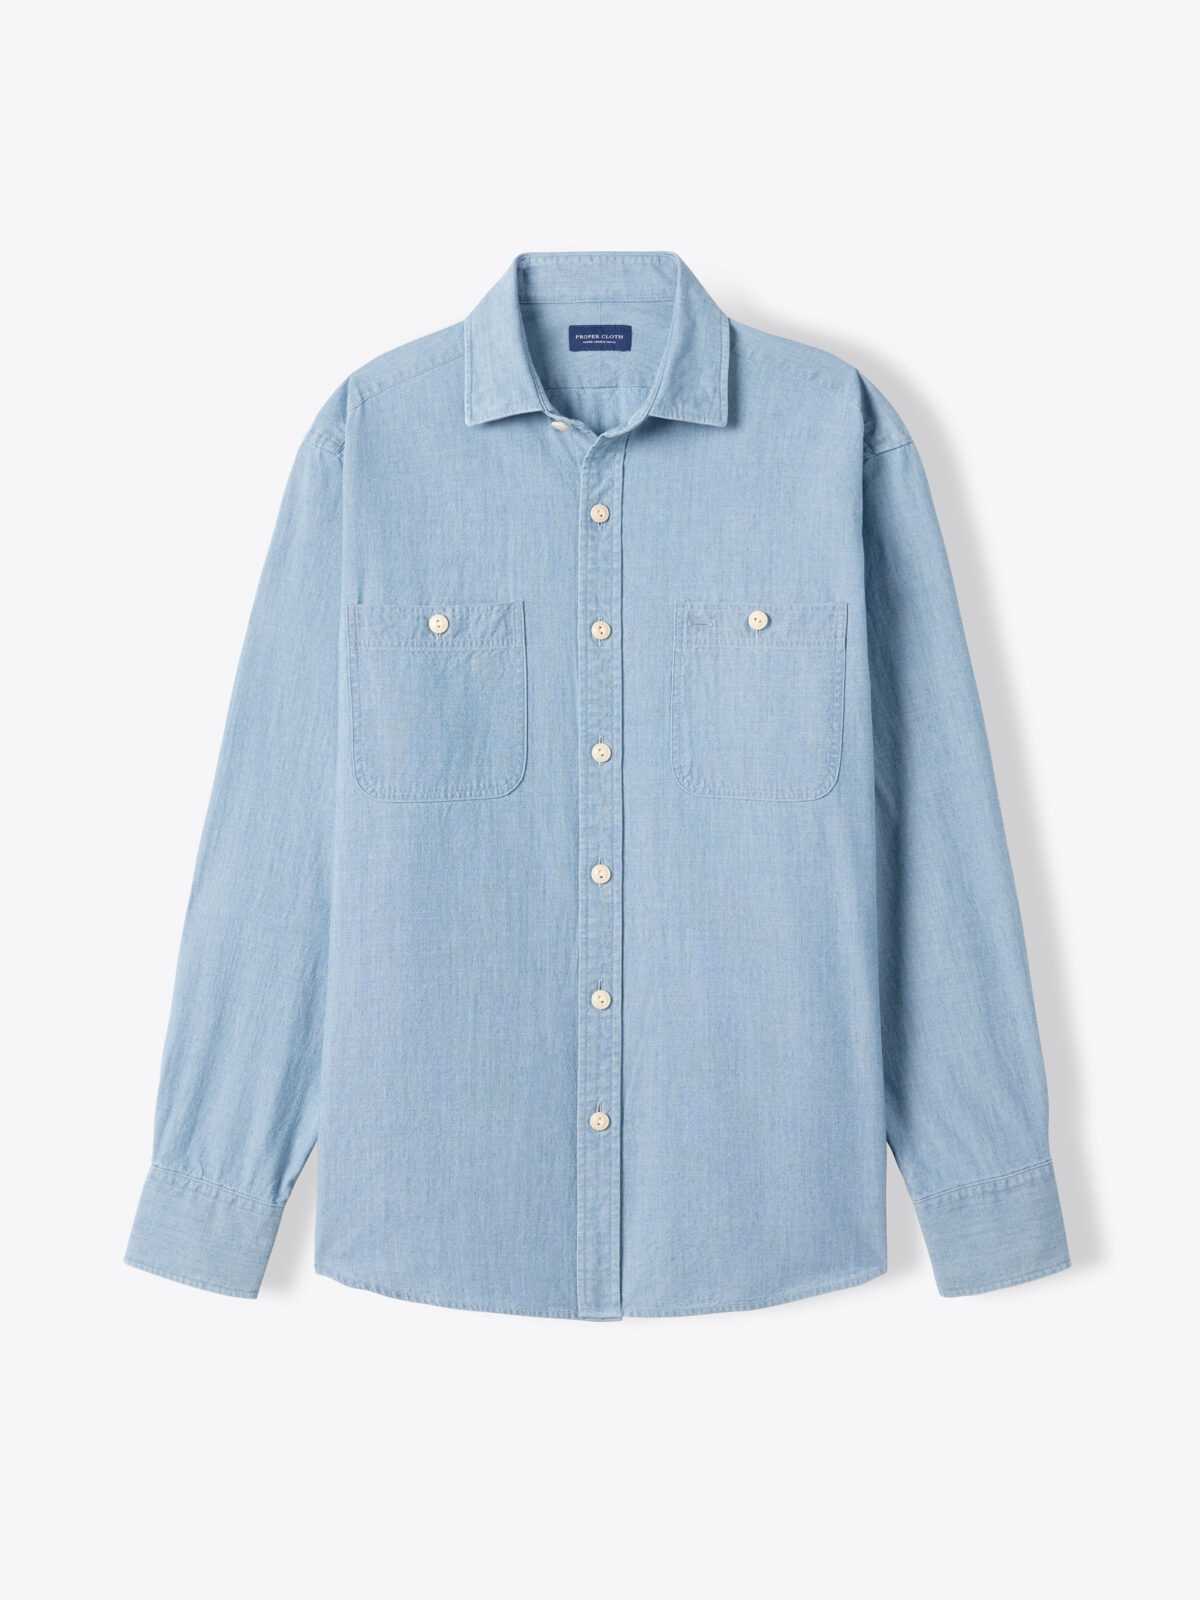 Check styling ideas for「Chambray Work Long-Sleeve Shirt、Cotton